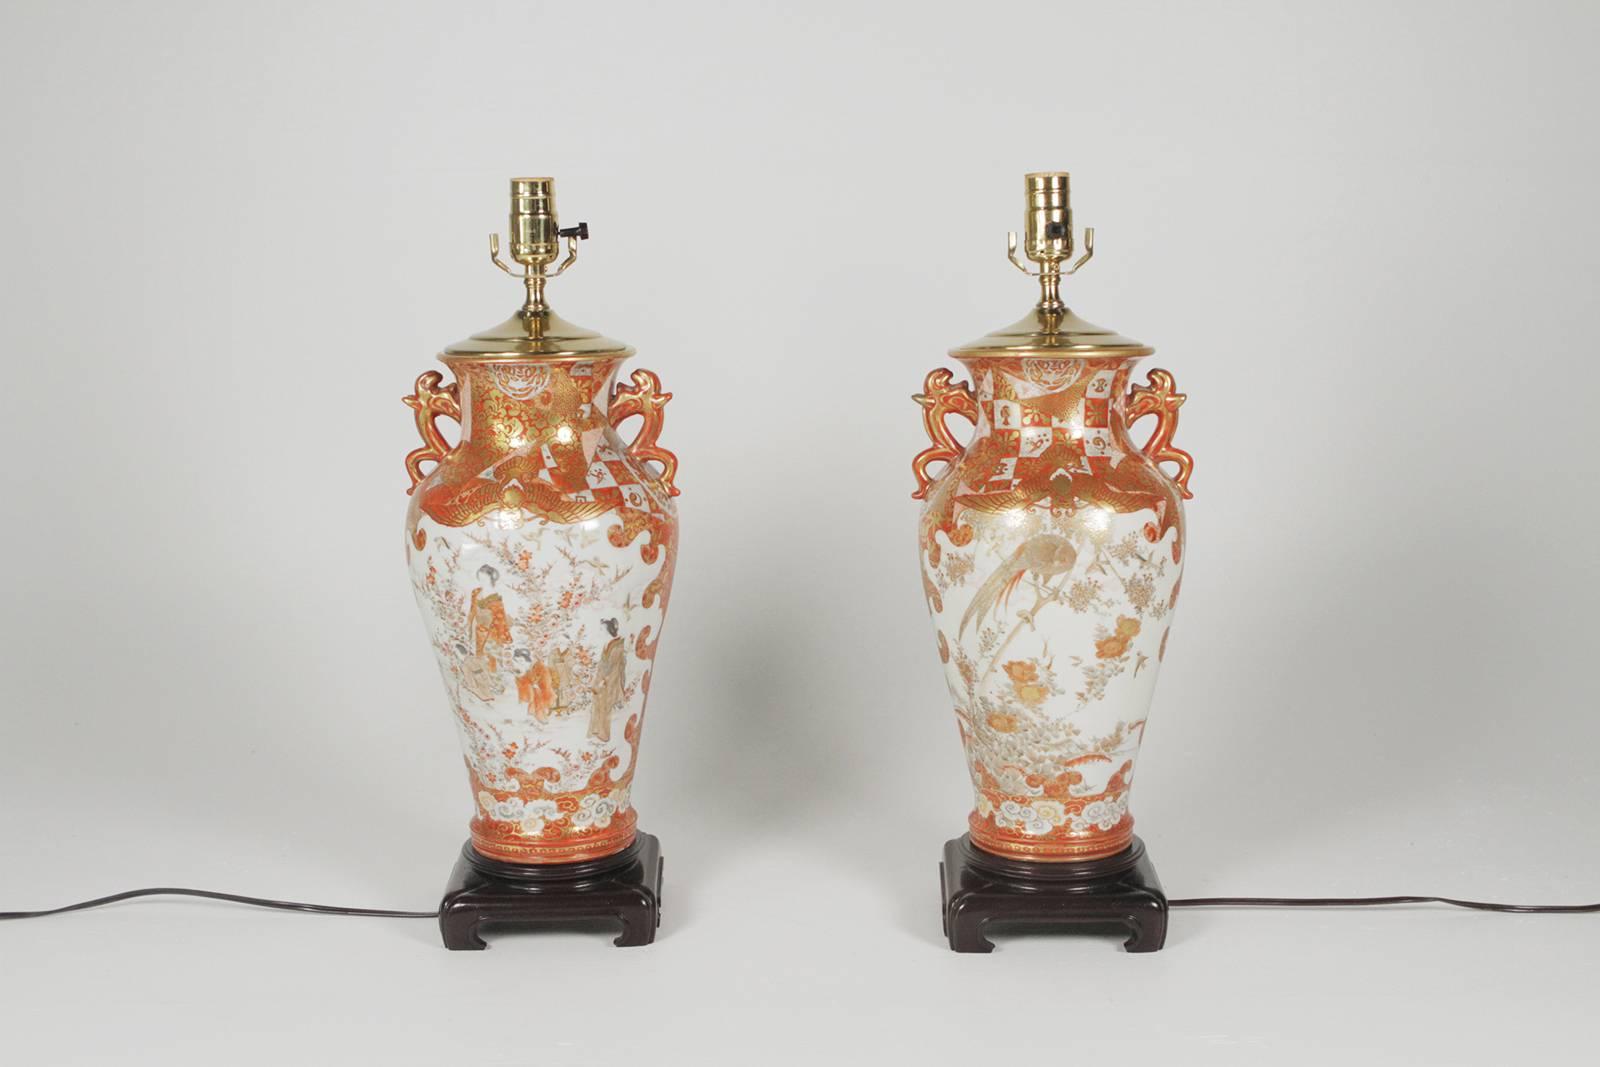 A pair of Meiji period Kutani vases Japan, circa 1890 with stylized handles, with finely painted figures and phoenix birds-now as lamps. The lamps are 8 inches wide, 21 height to top of the to socket, 30 inches to the top of the shade.